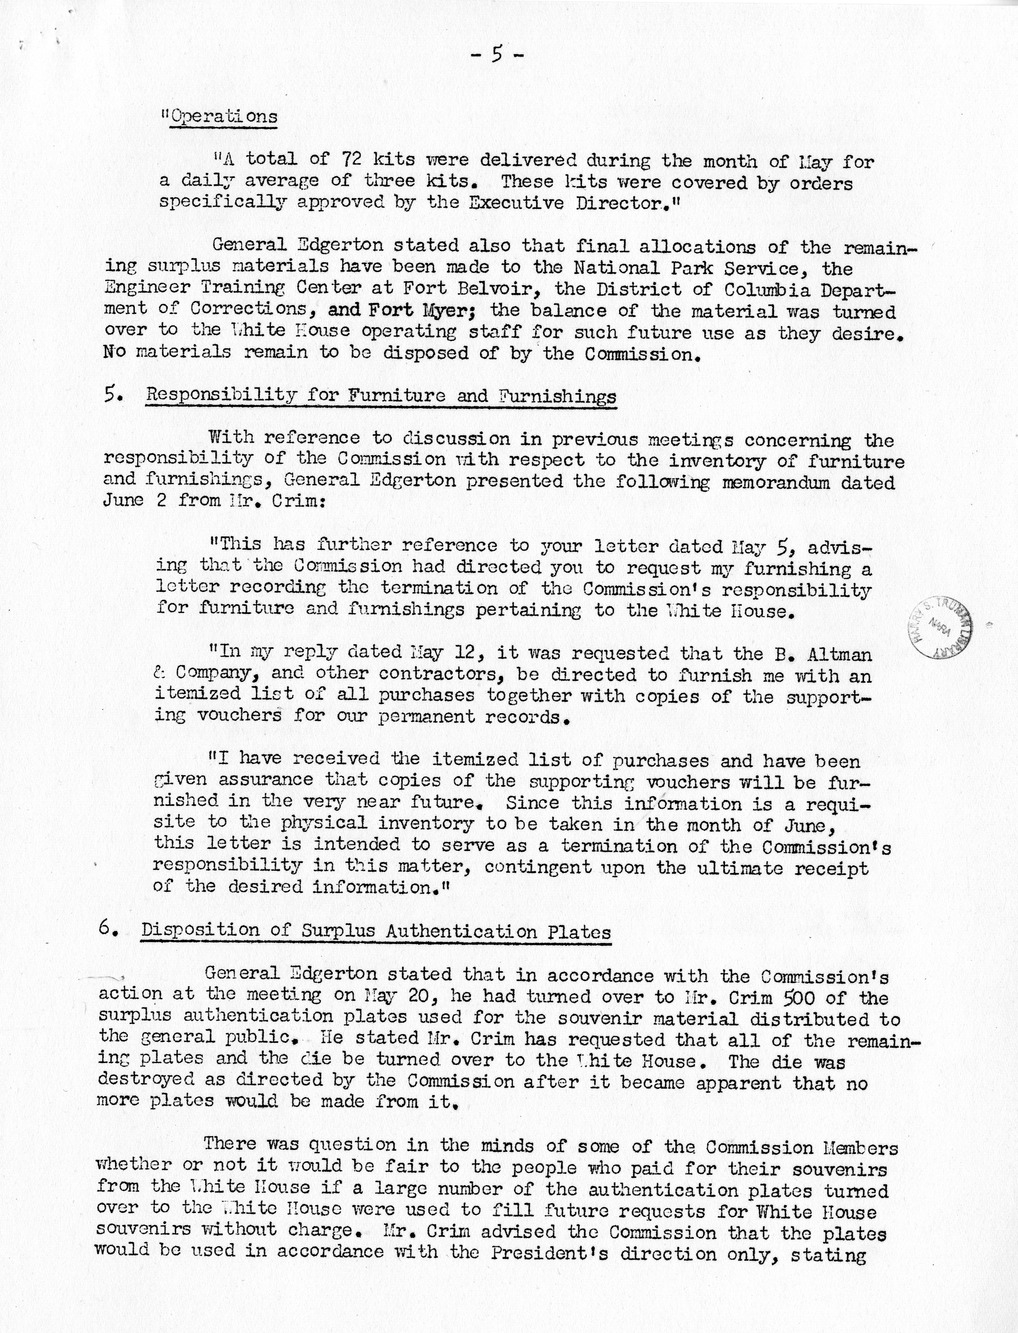 Minutes of the Seventieth Meeting of the Commission On Renovation of the Executive Mansion